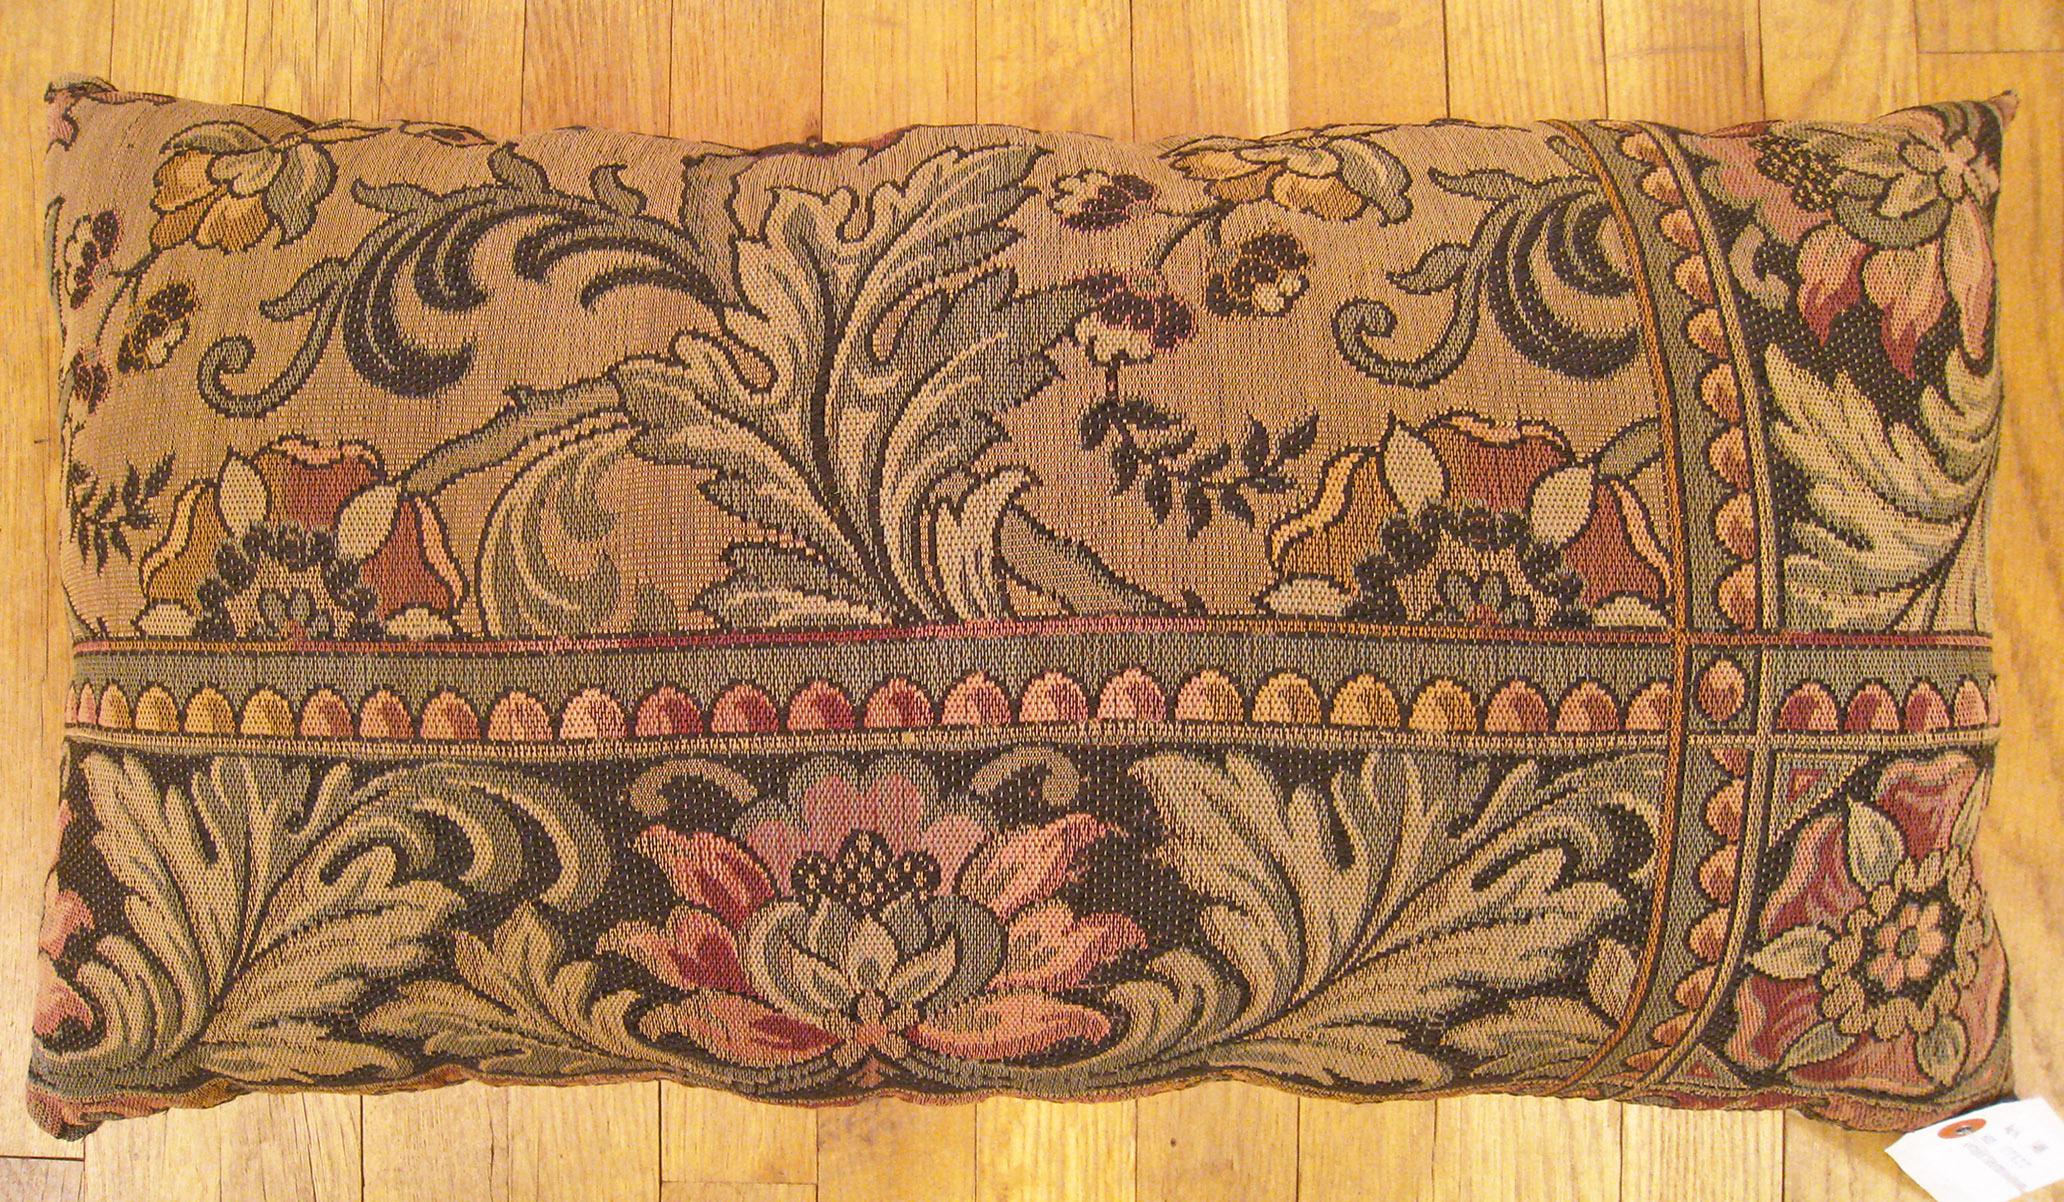 Antique Jacquard Tapestry pillow; size 1'3” x 2'2”.

An antique decorative pillow with floral elements allover a brown central field, size 1'3